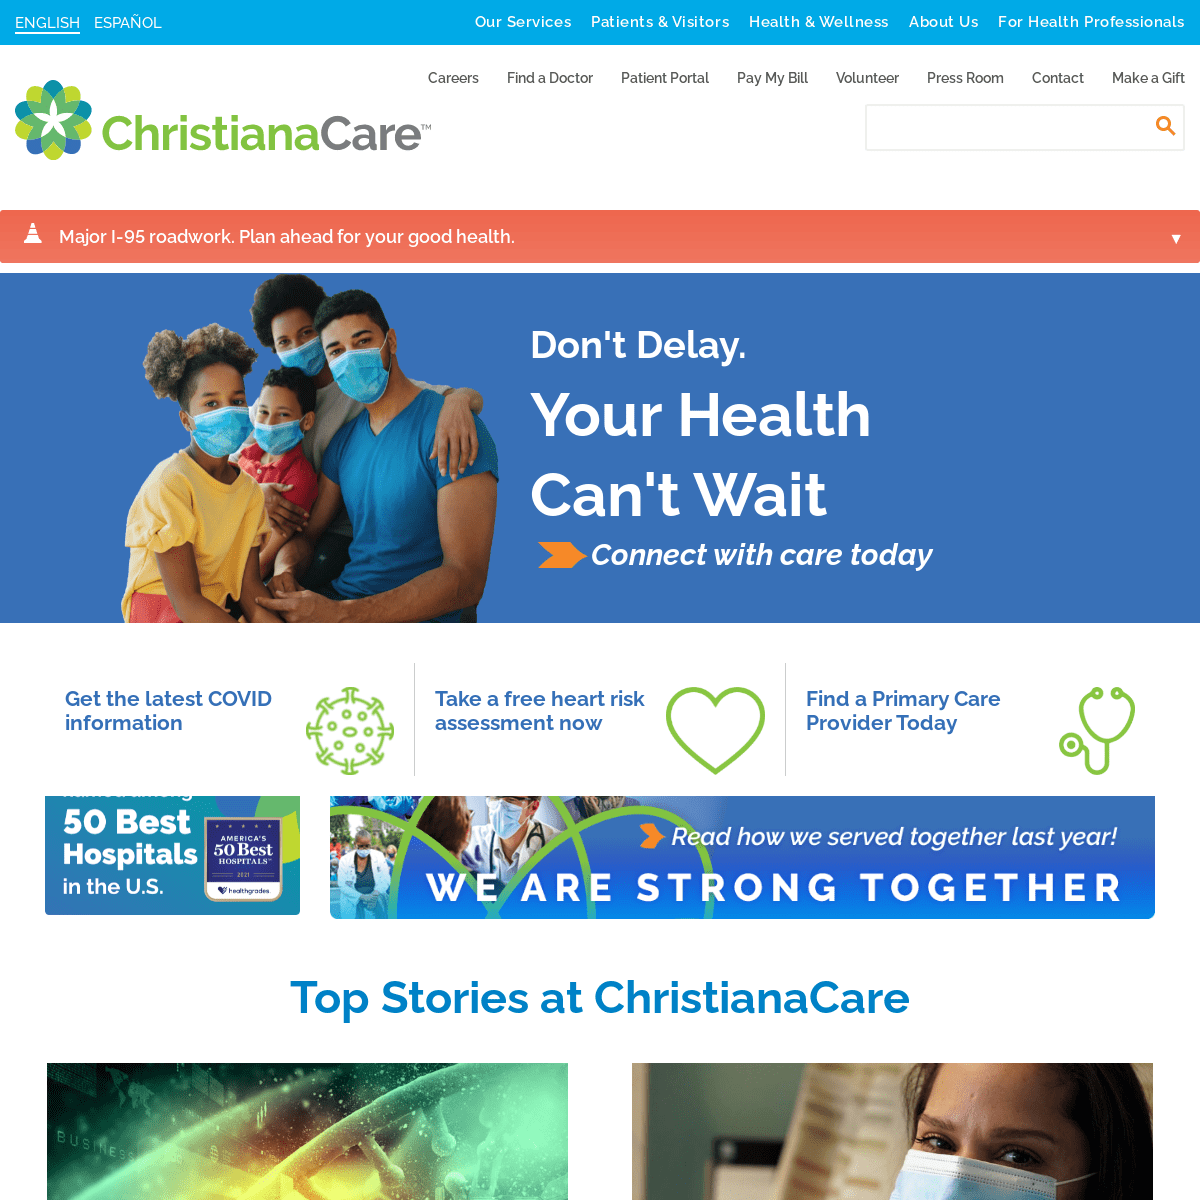 A complete backup of https://christianacare.org